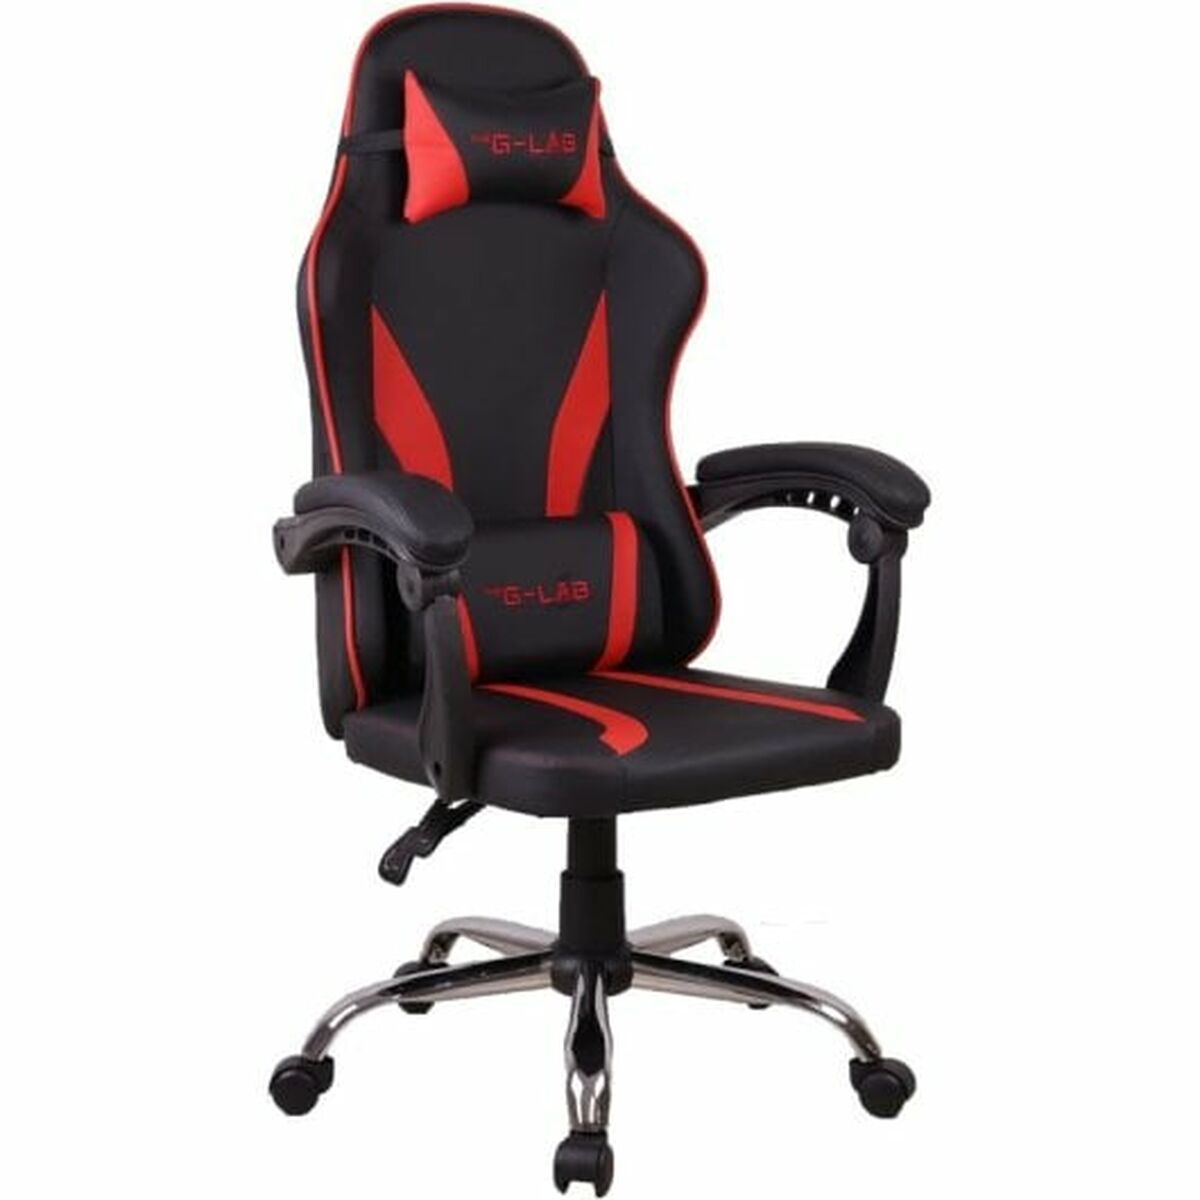 Sedia Gaming The G-Lab Neon Rosso